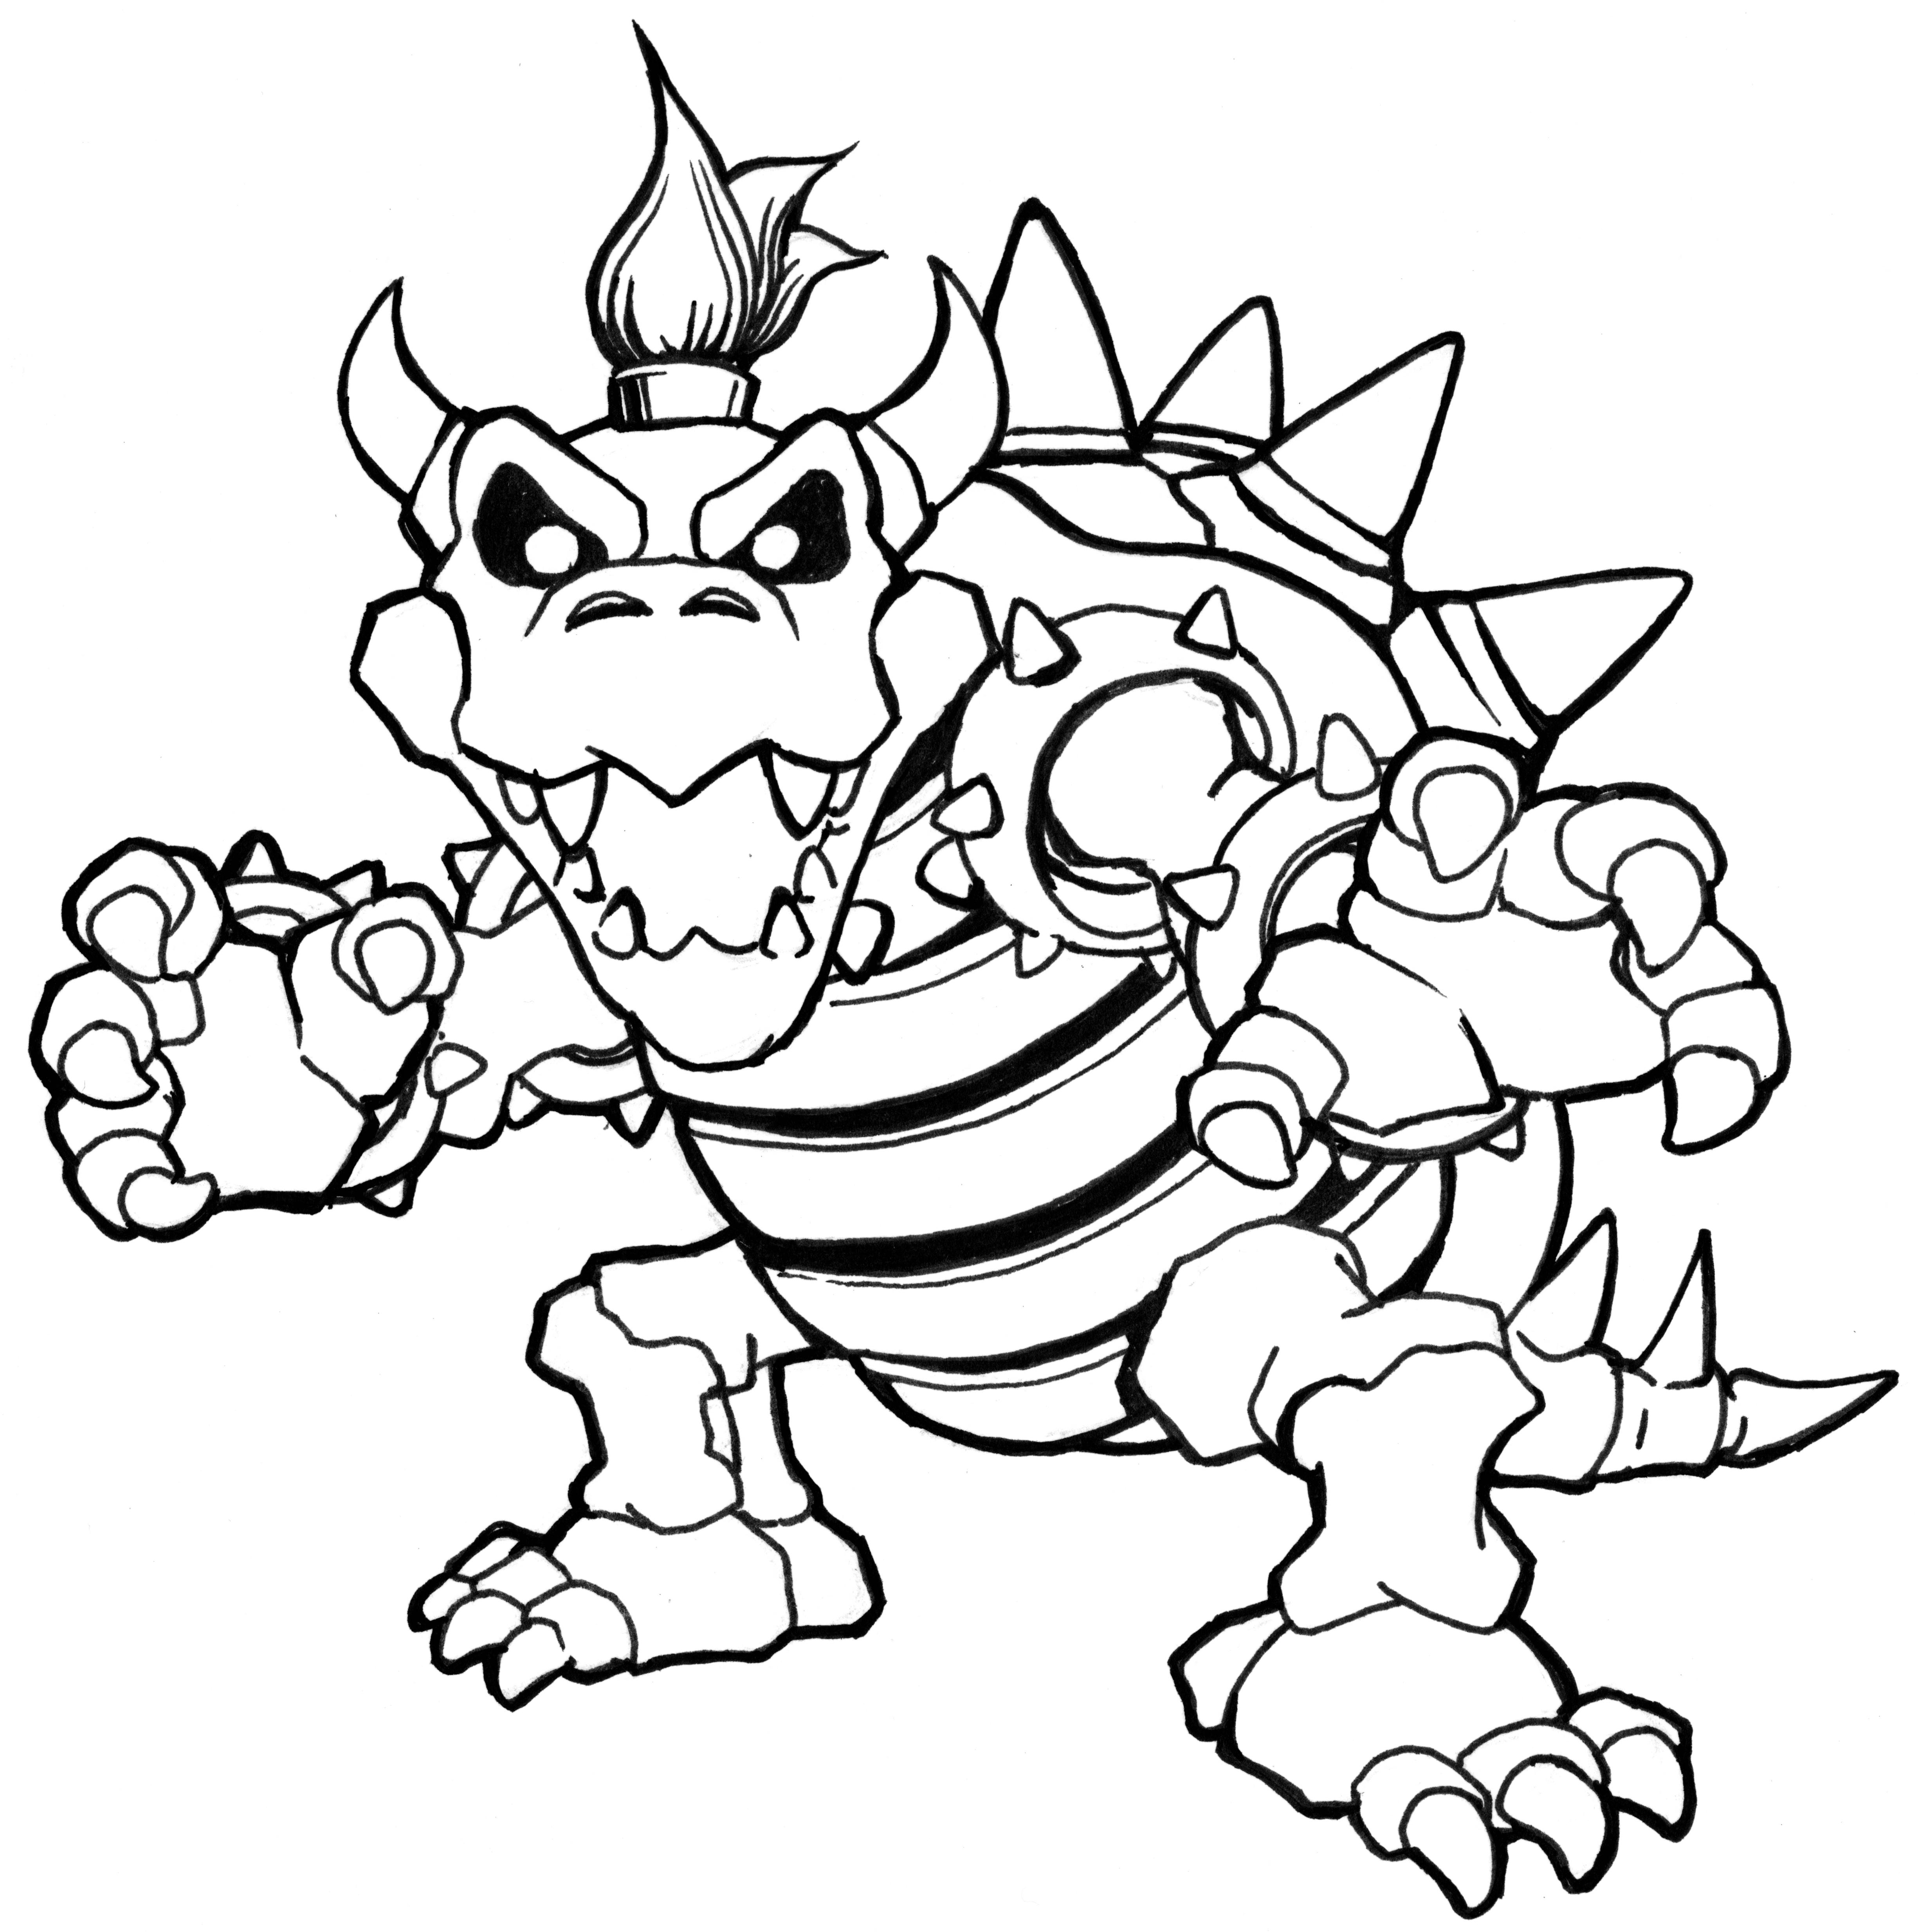 Bowser Coloring Pages Excellent | Coloring pages